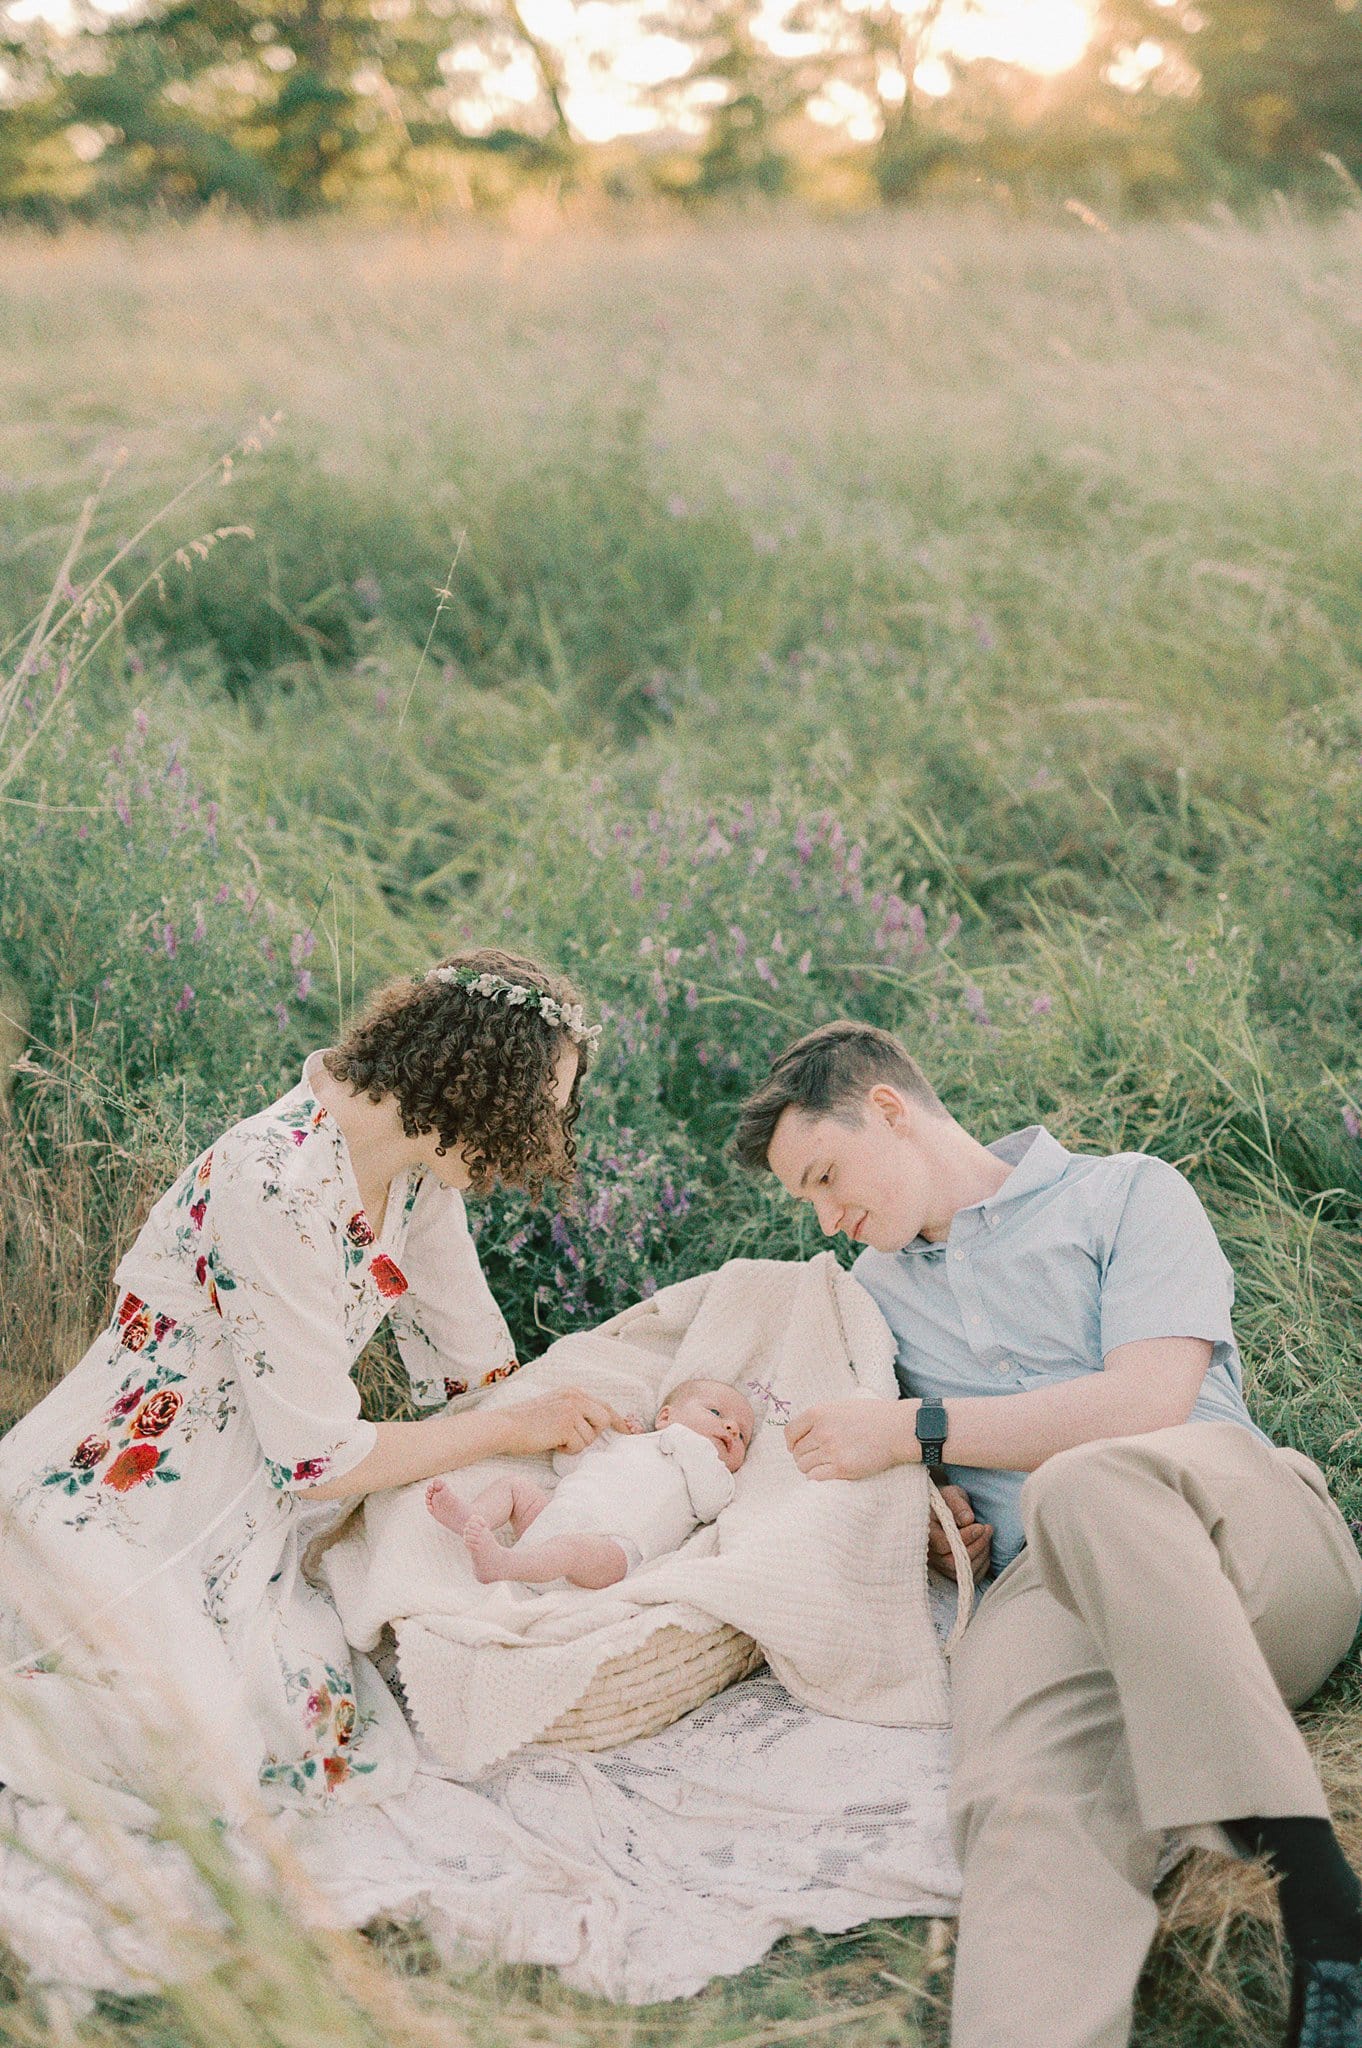 New parents lay on a picnic blanket with their newborn baby in a basket in a field of tall grass at sunset